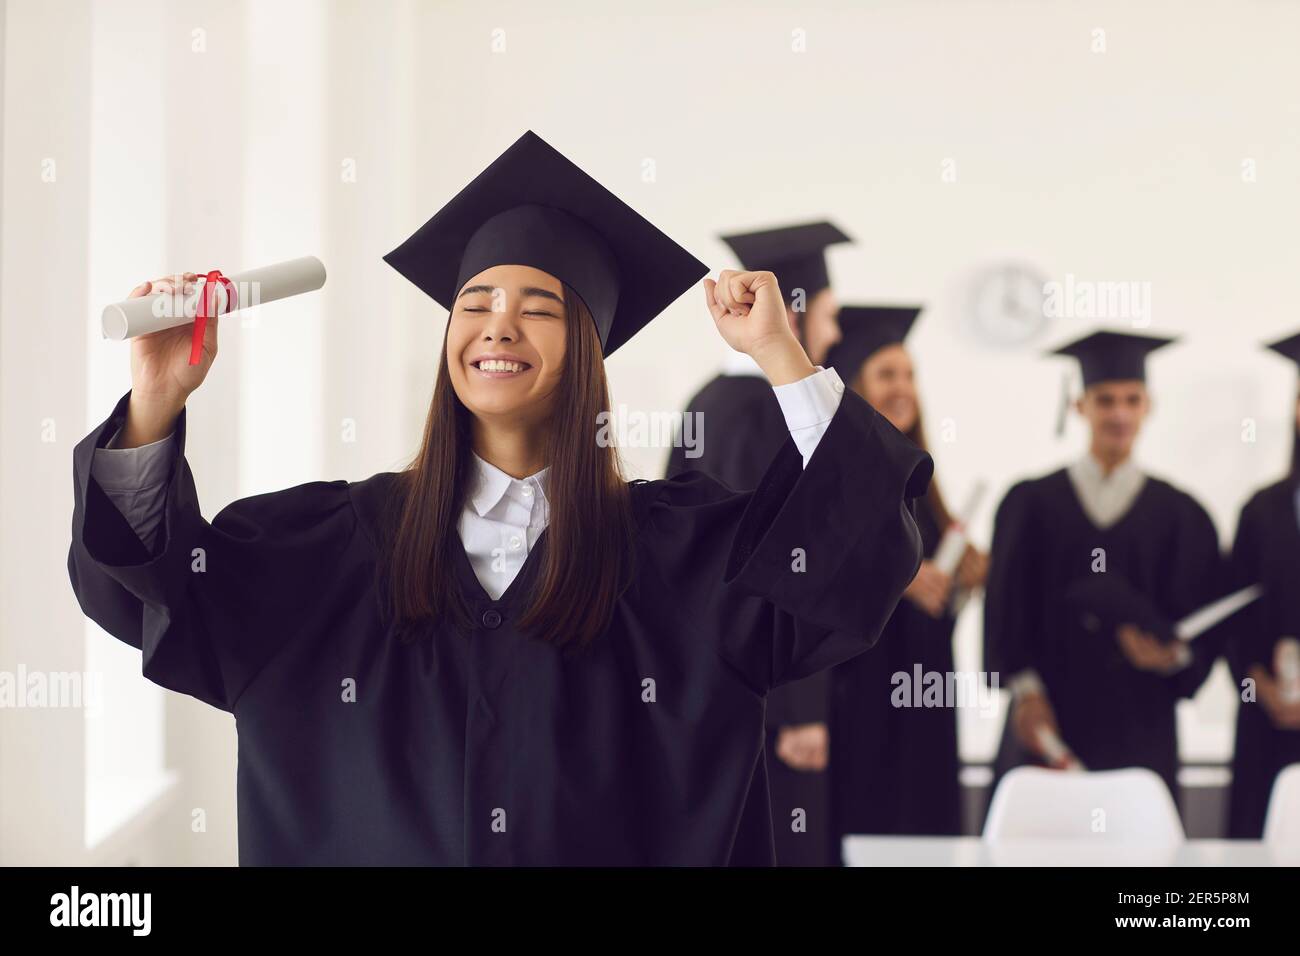 Portrait of a young female student who is happy with her eyes closed holding a diploma. Stock Photo